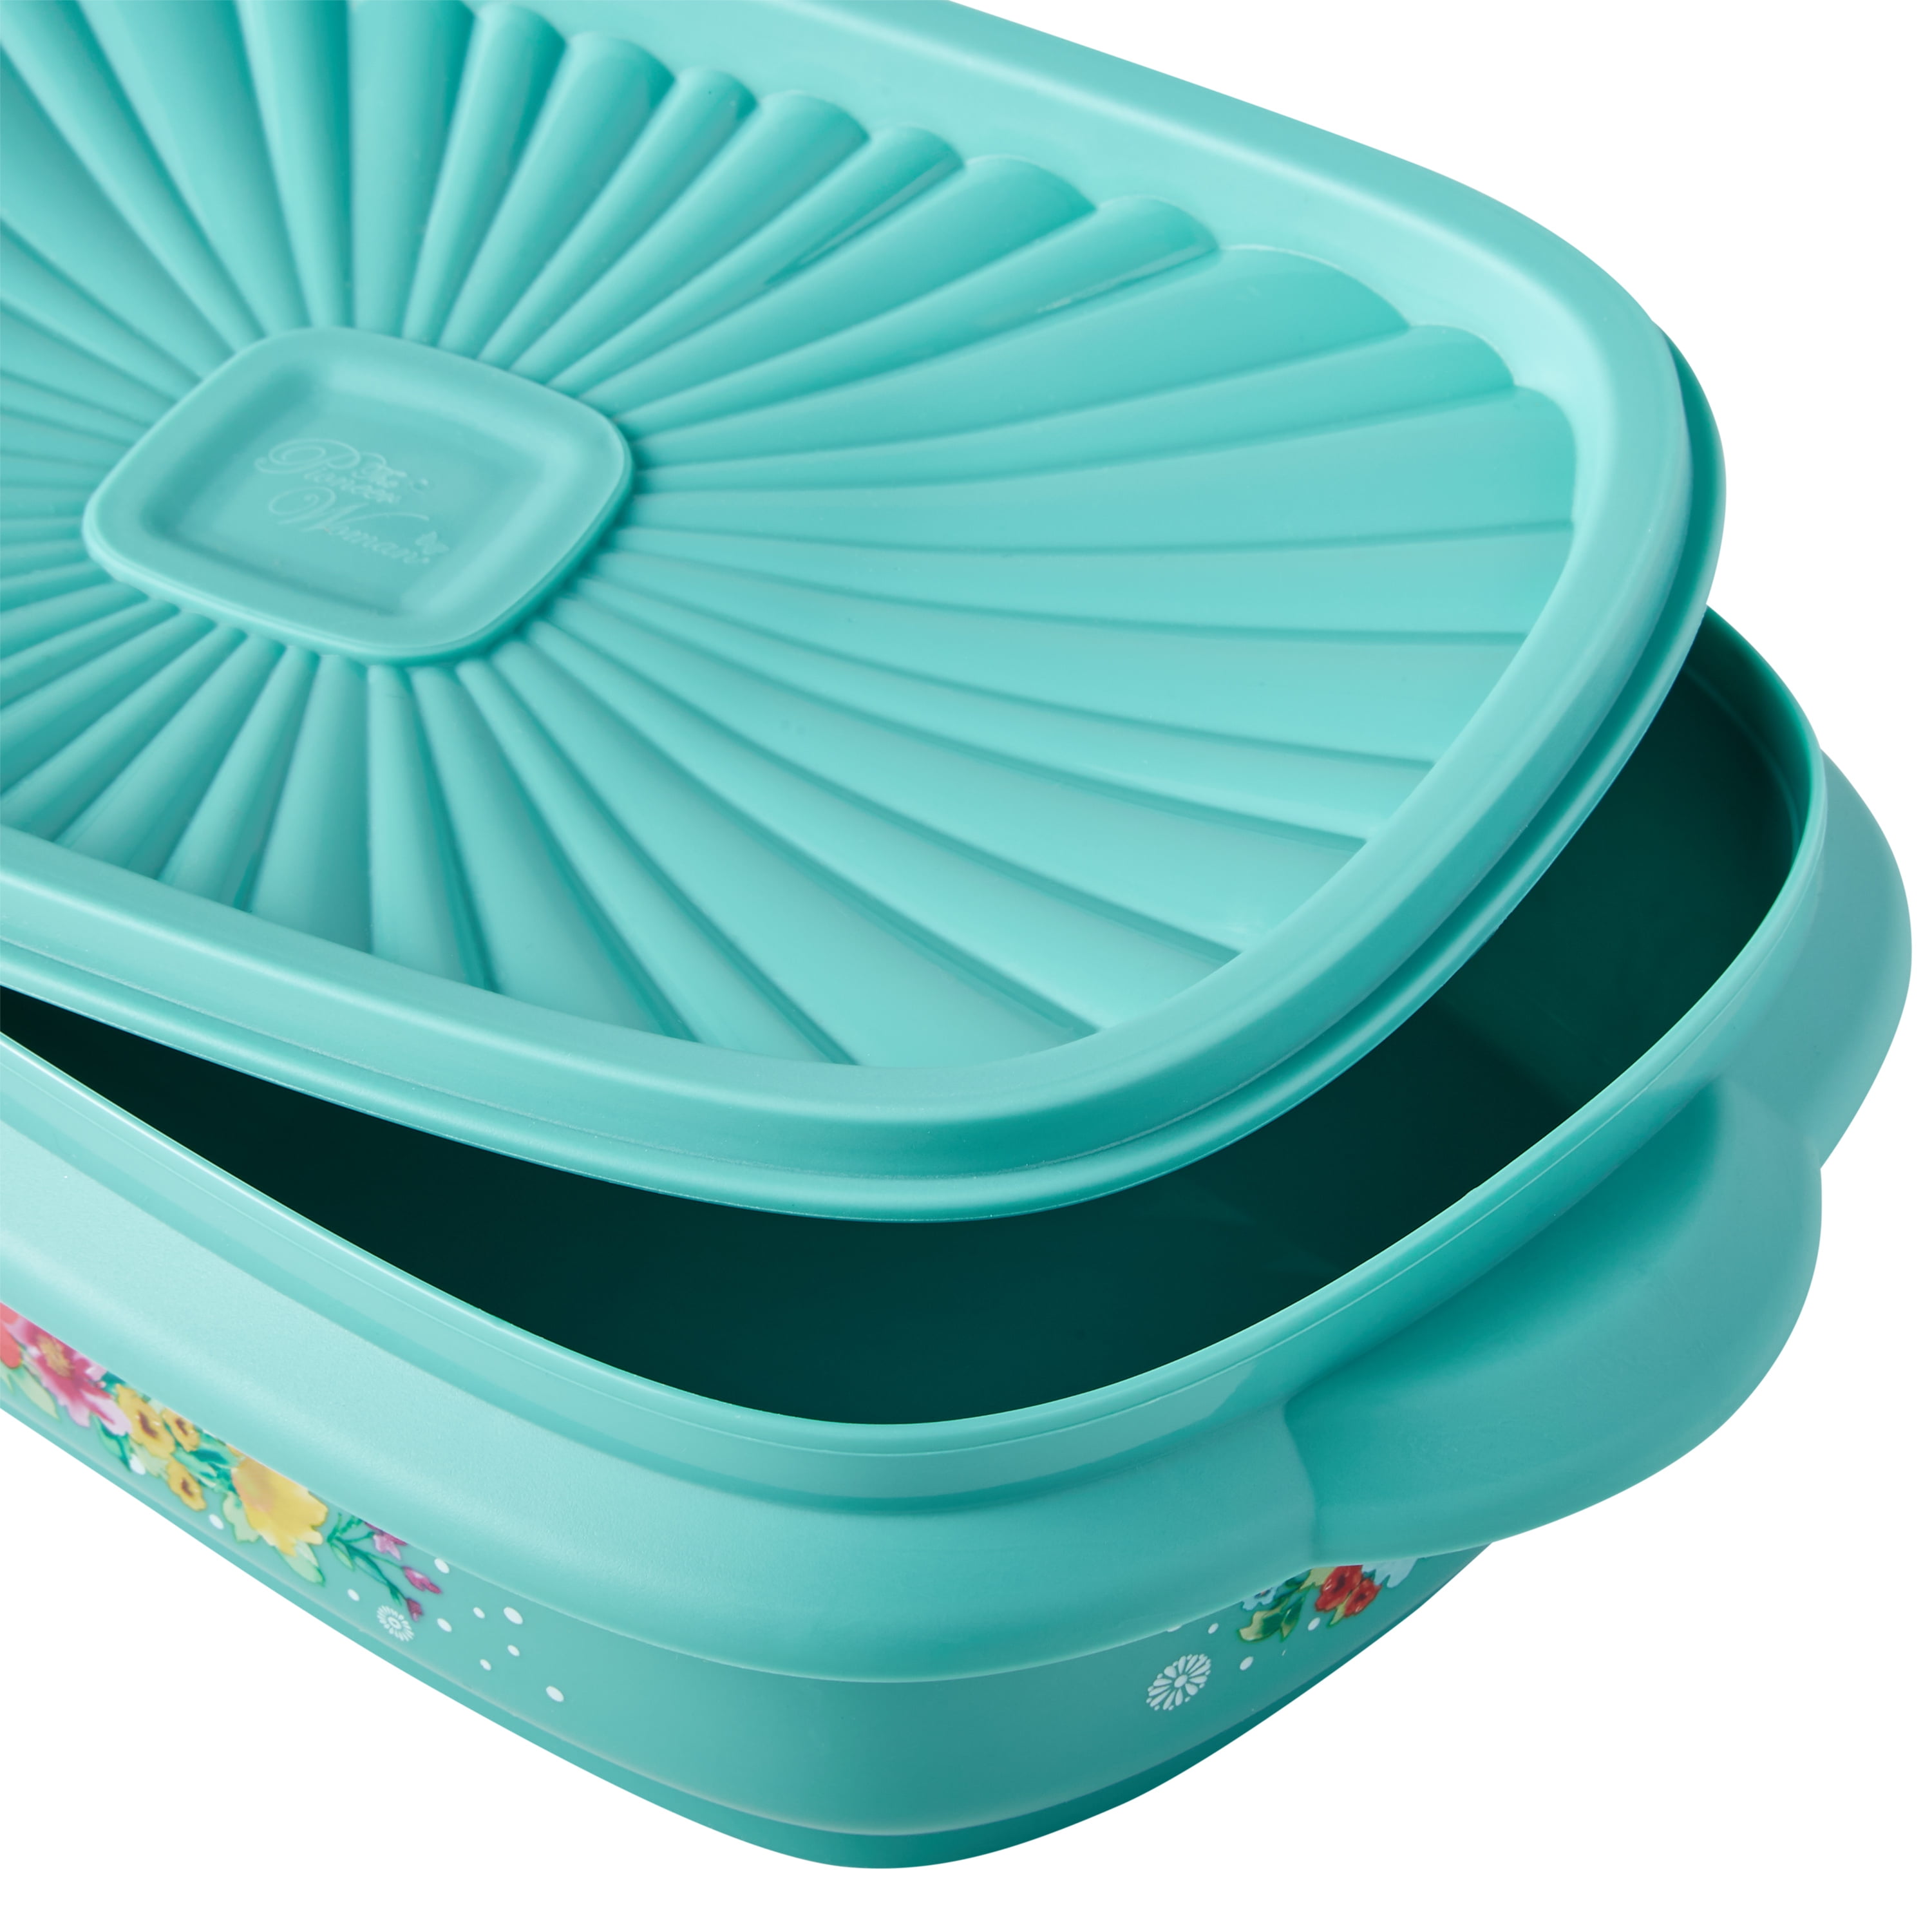 The Pioneer Woman 4 Cup Capacity Plastic Food Storage Container